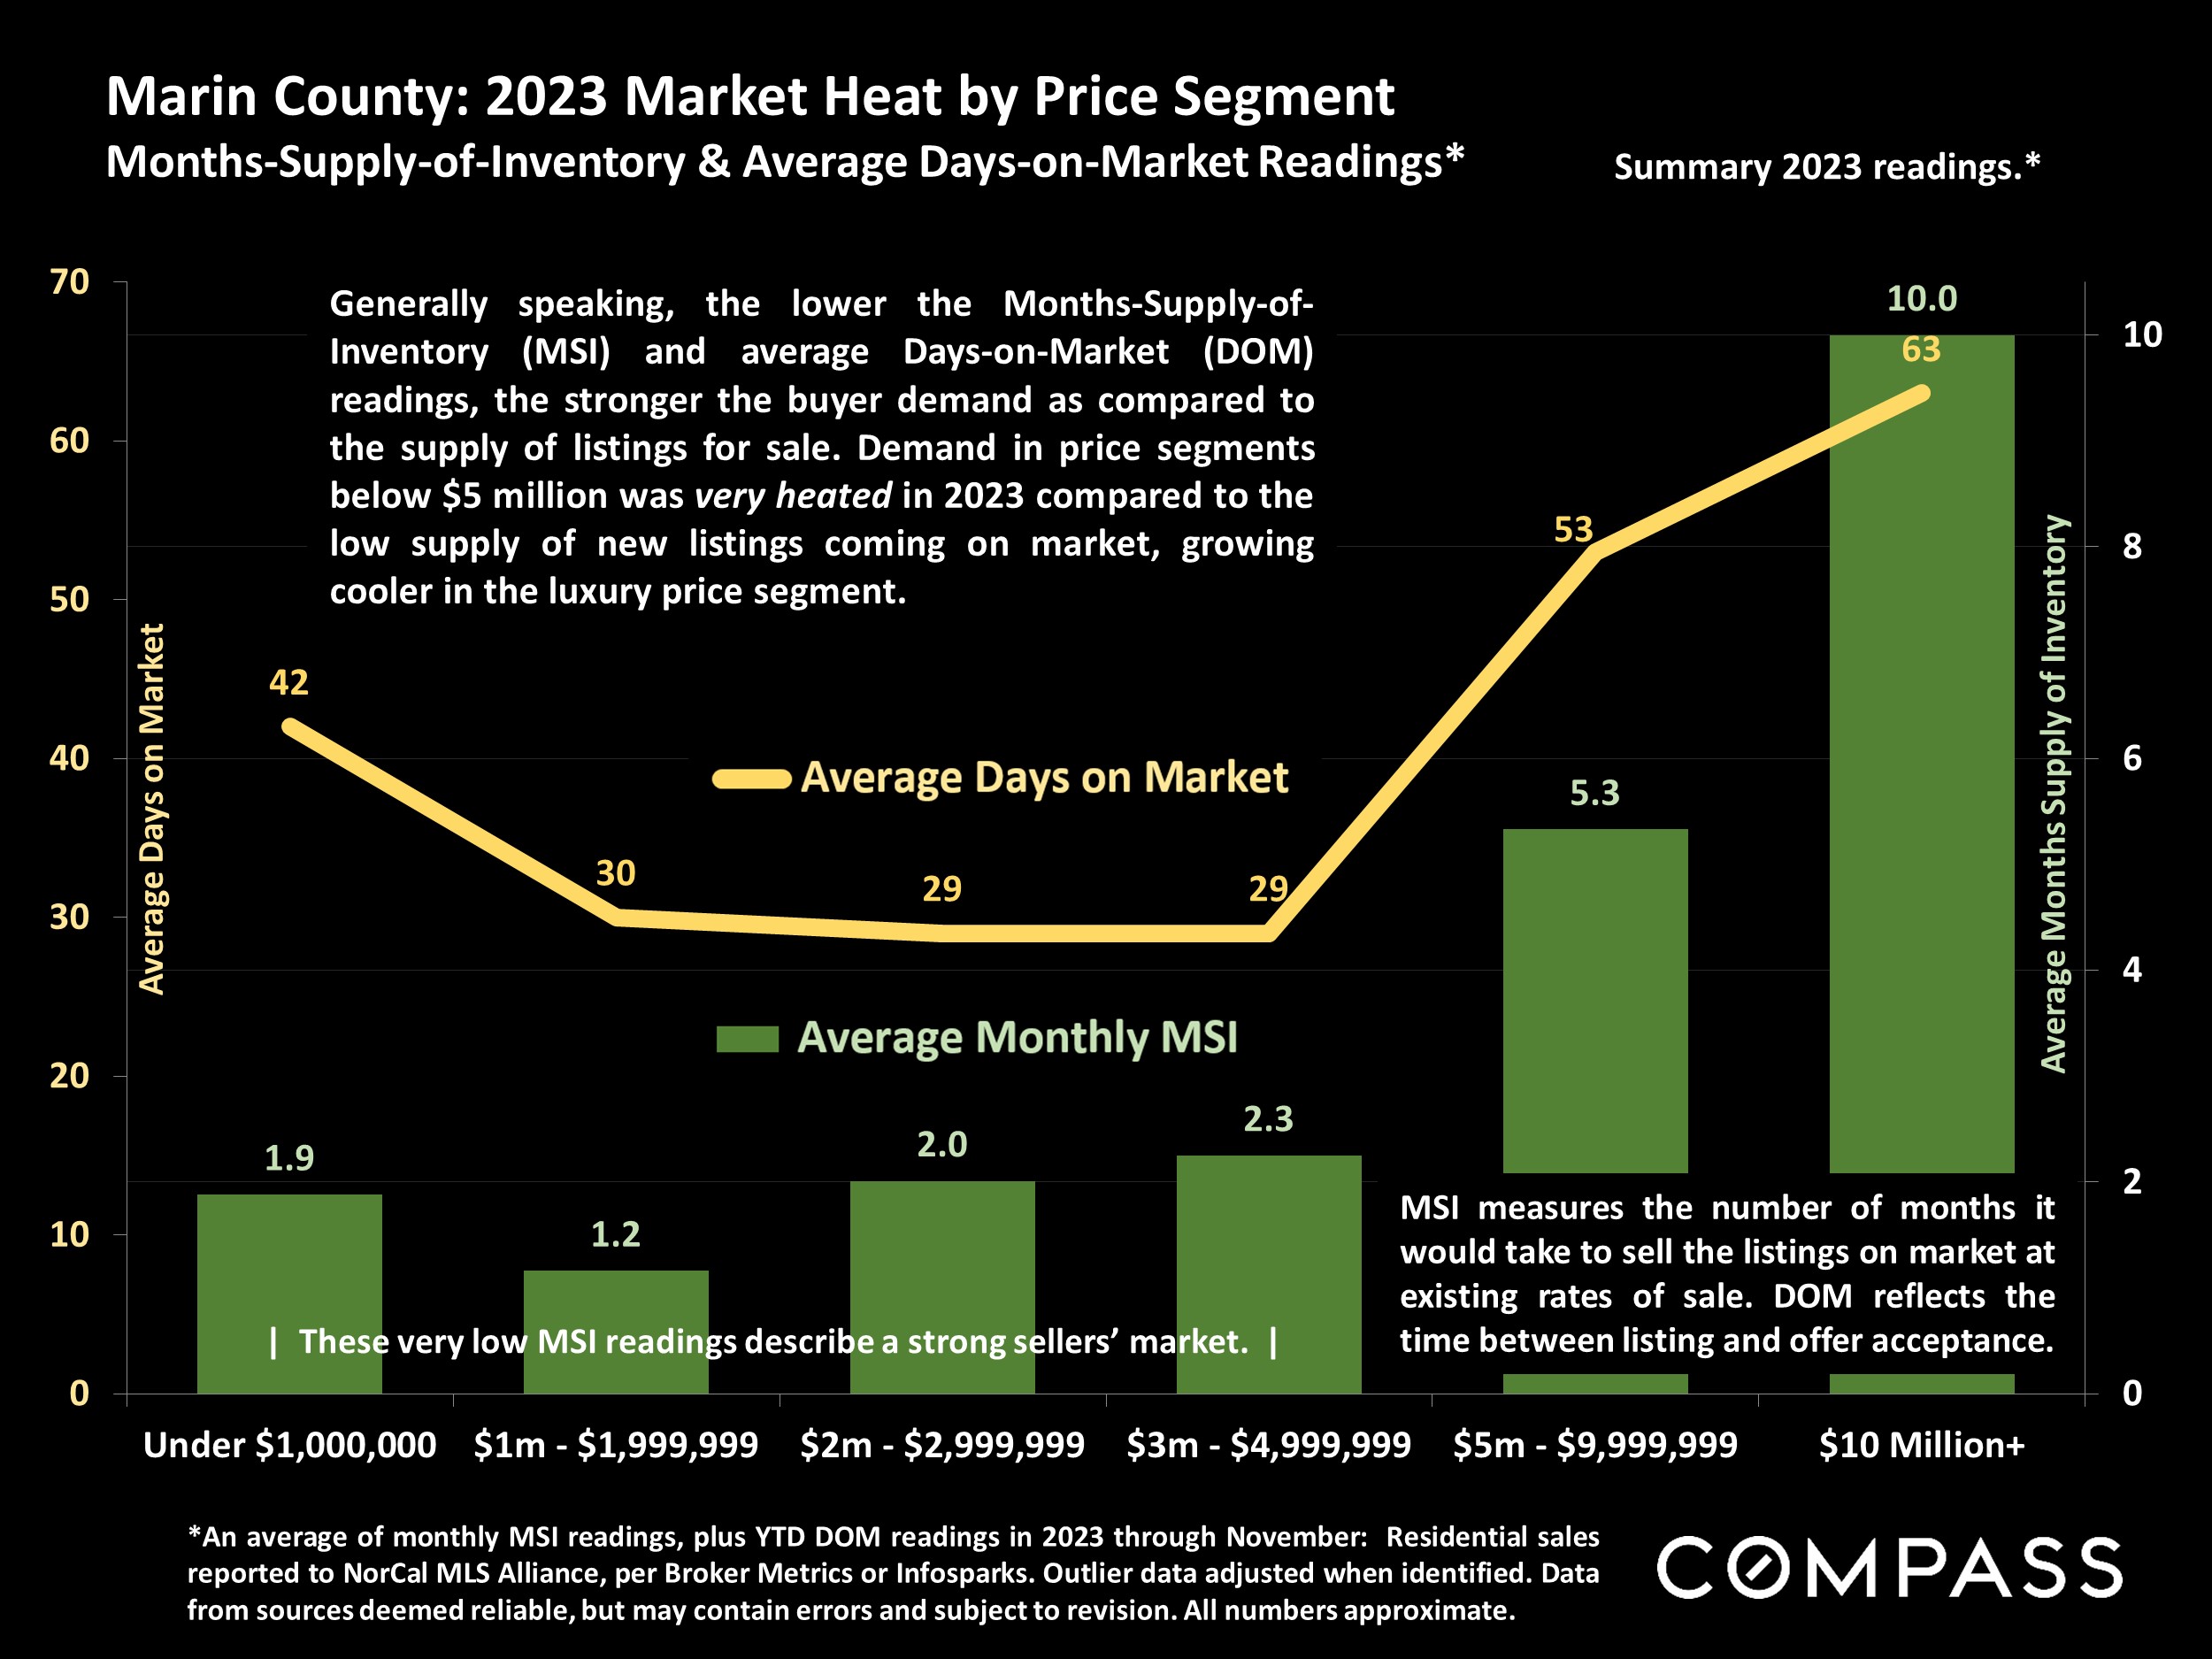 Marin County: 2023 Market Heat by Price Segment Months-Supply-of-Inventory & Average Days-on-Market Readings*